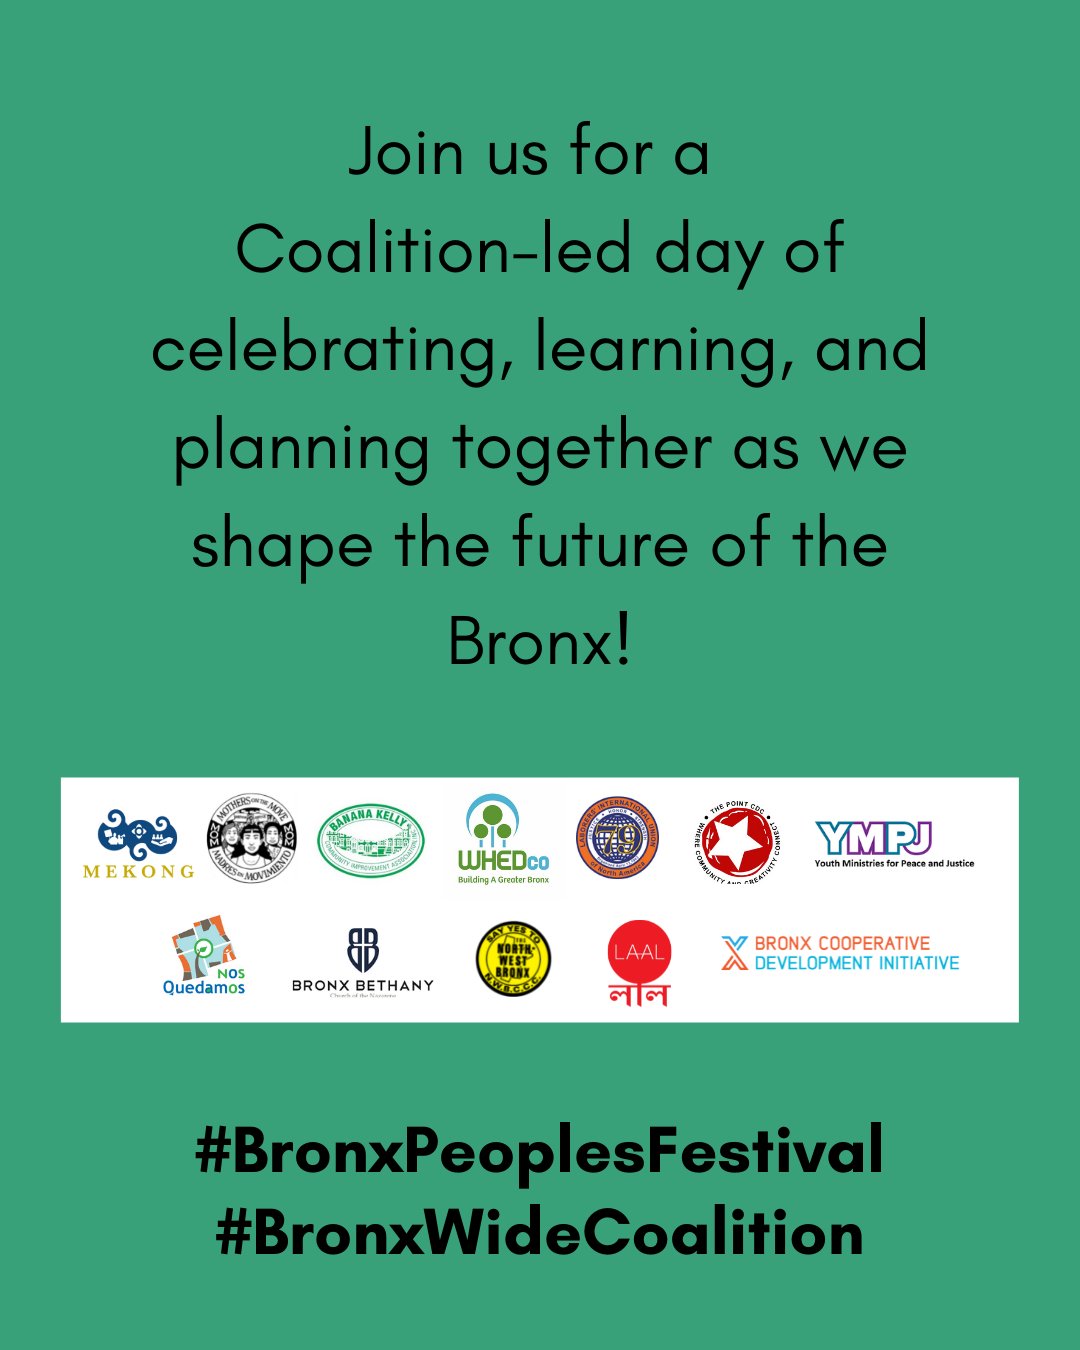 Bronx People's Festival Strives To Raise Awareness About The Borough's Future